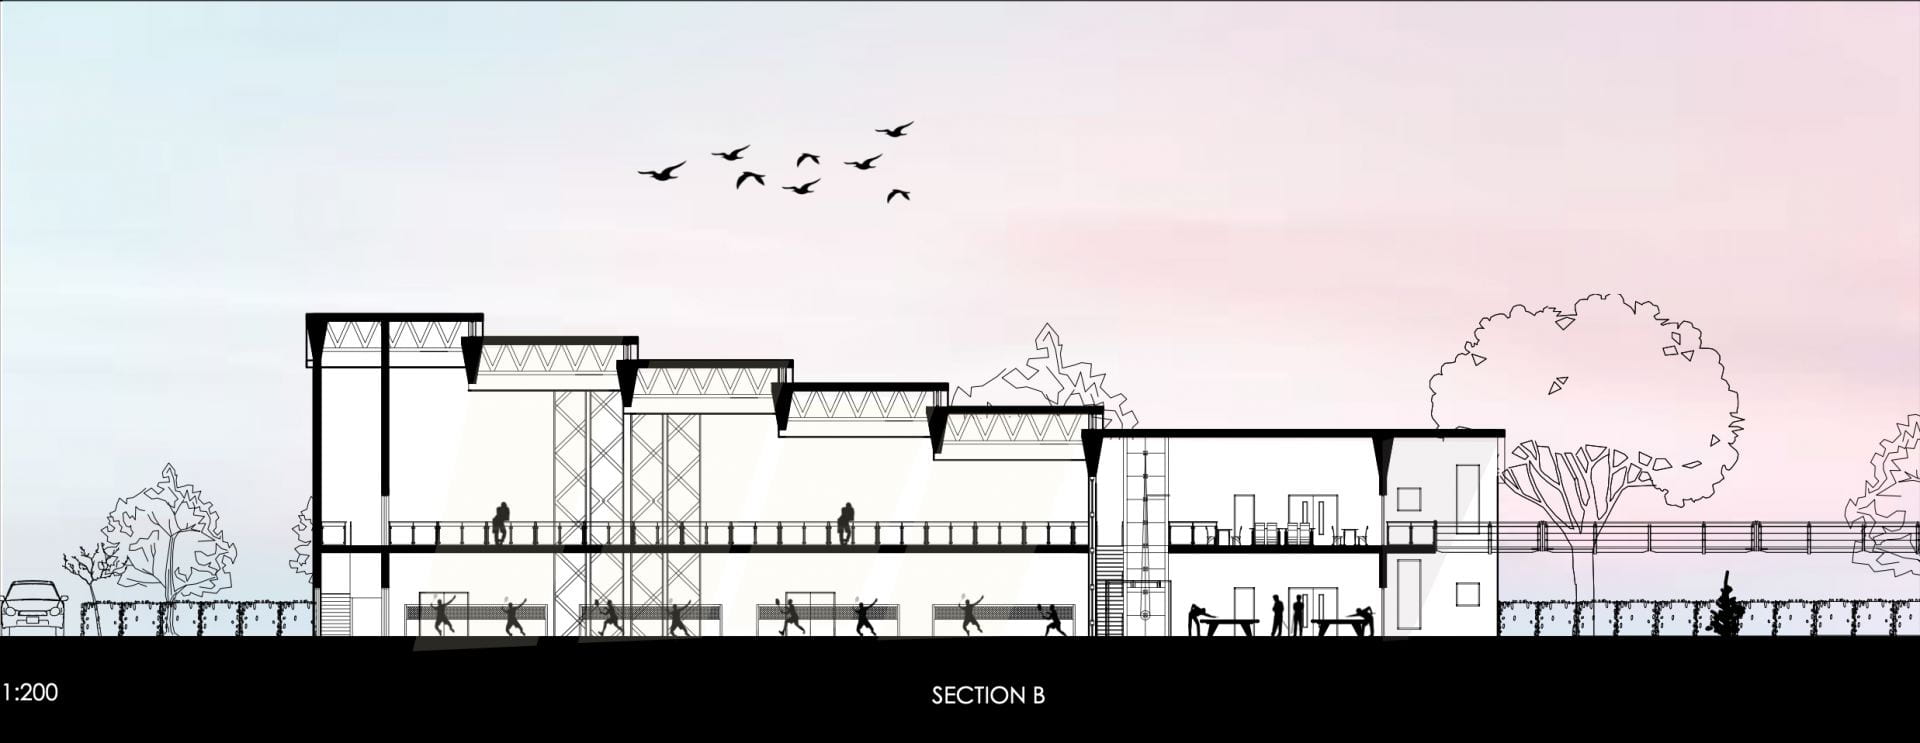 Sectional diagram showing how the building is designed